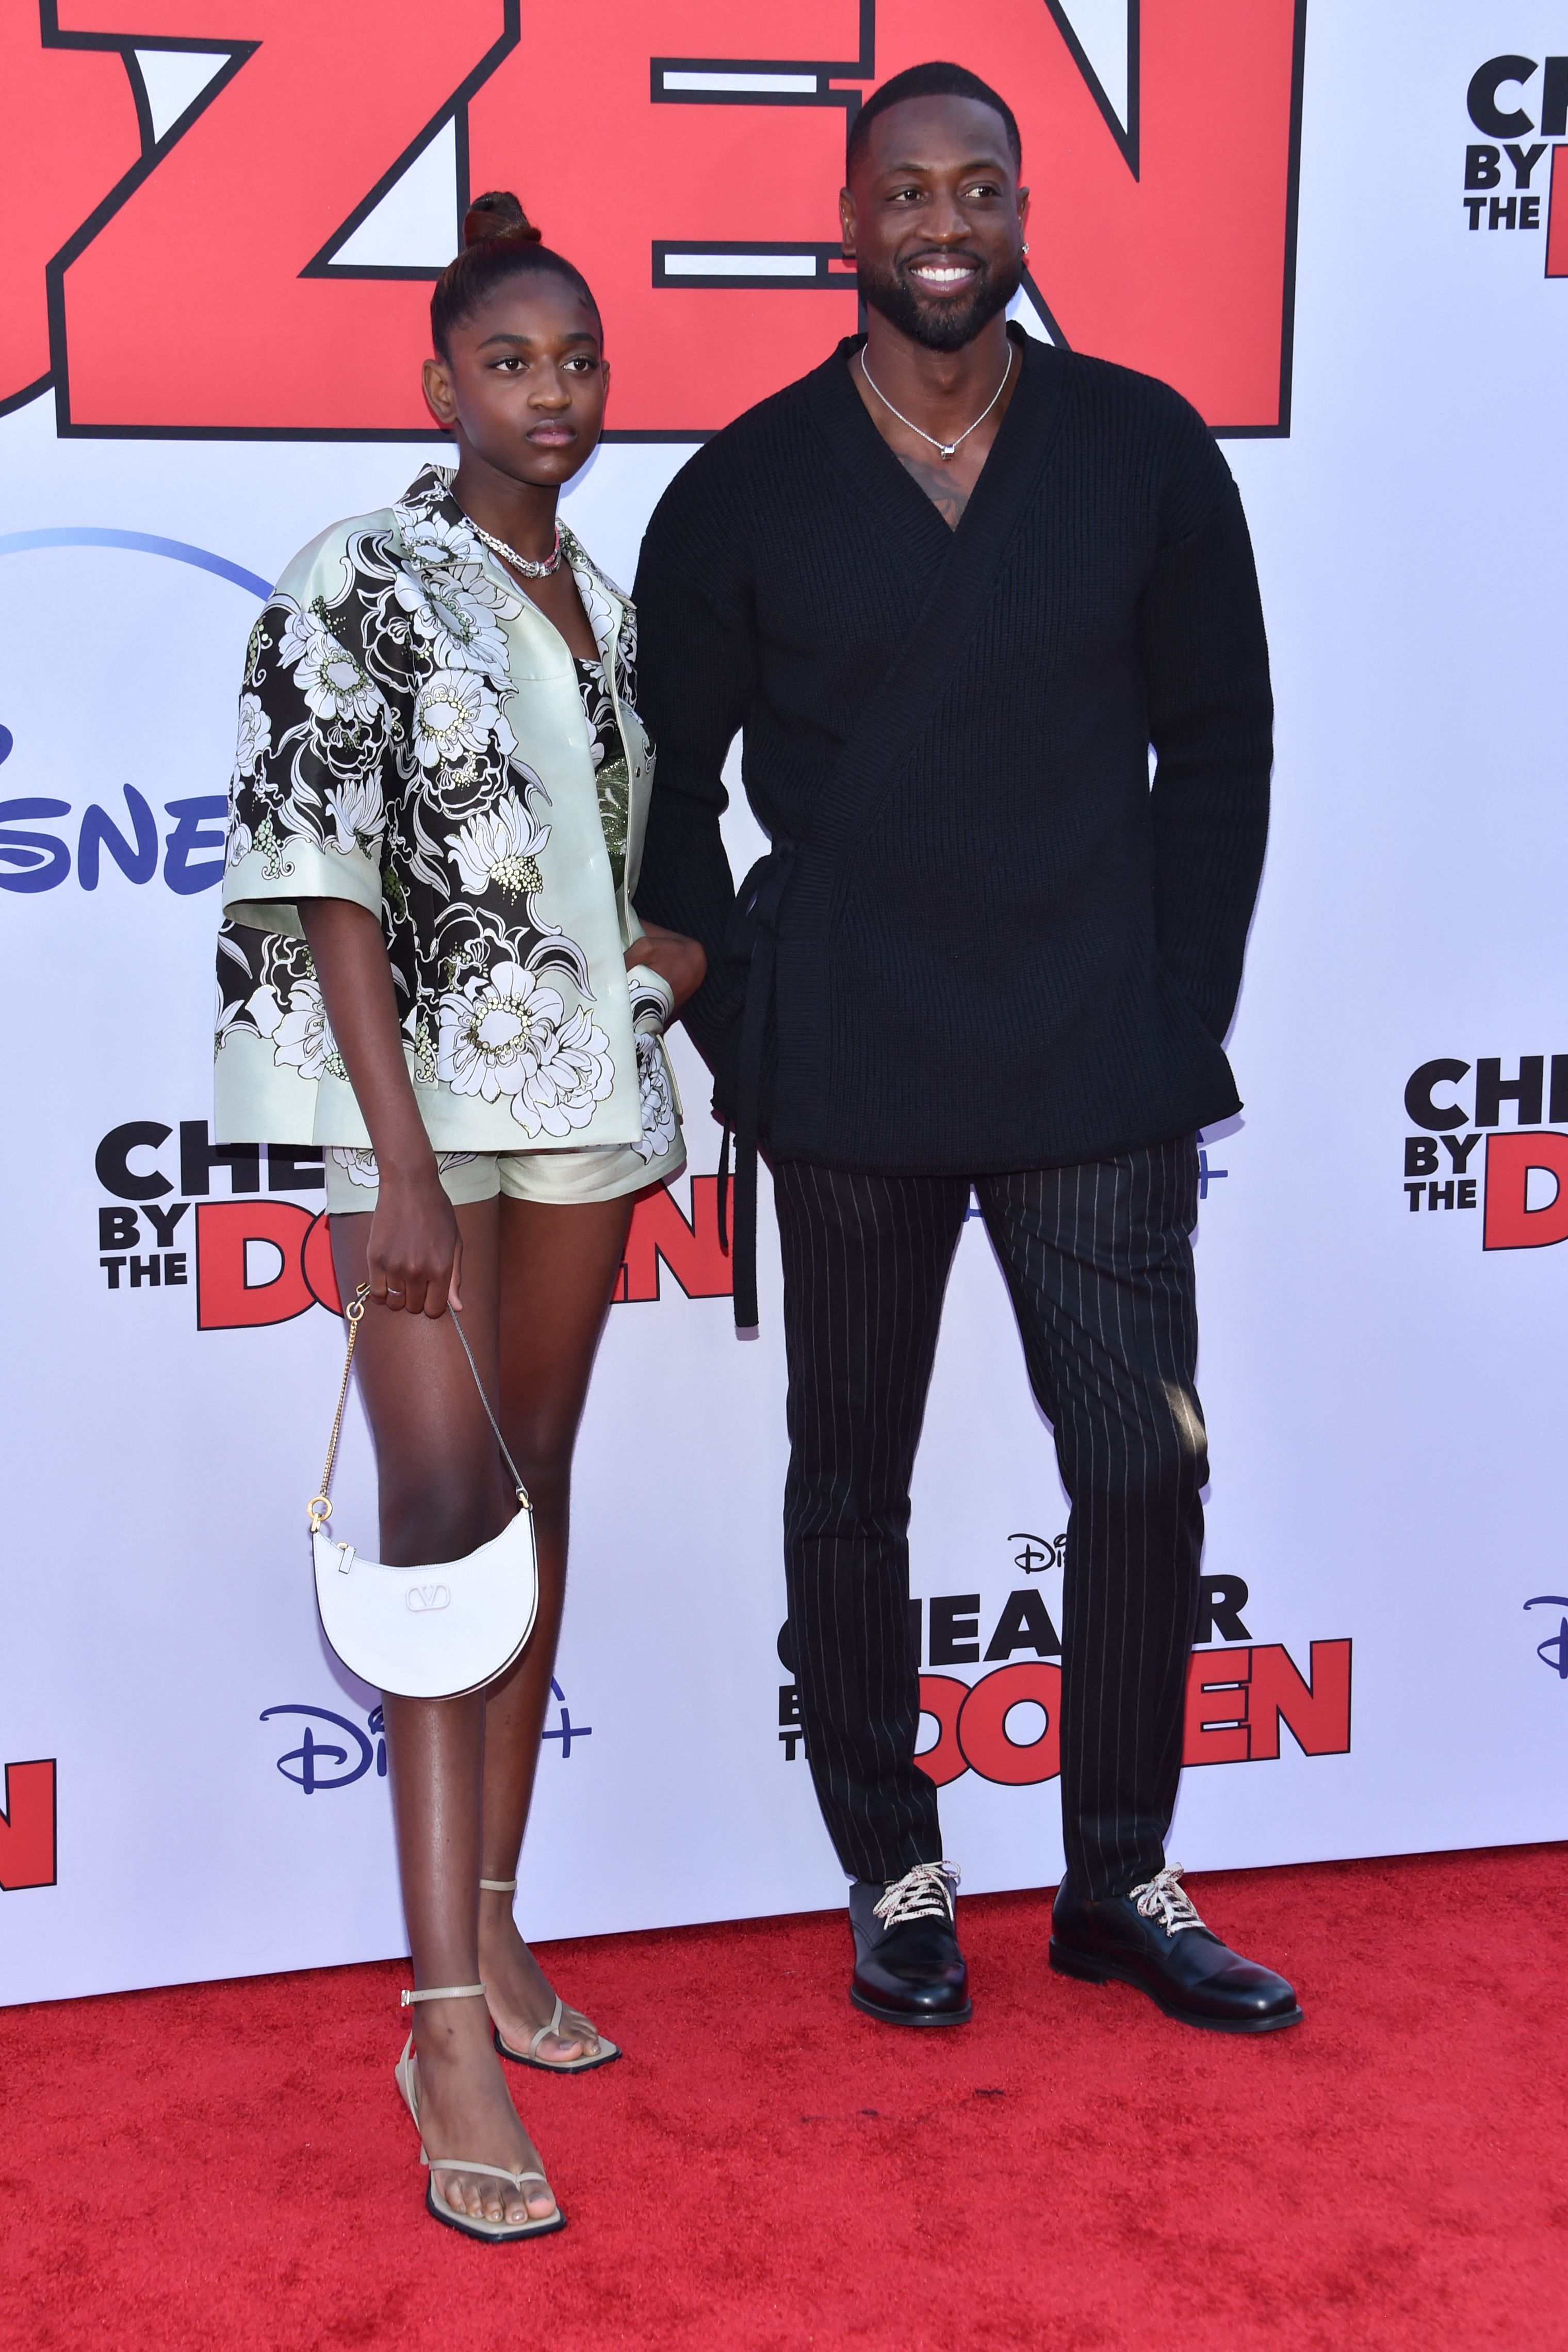 Zaya and Dwayne Wade at the Disney premiere of "Cheaper by the Dozen" in Hollywood, California on March 16, 2022 | Source: Getty Images